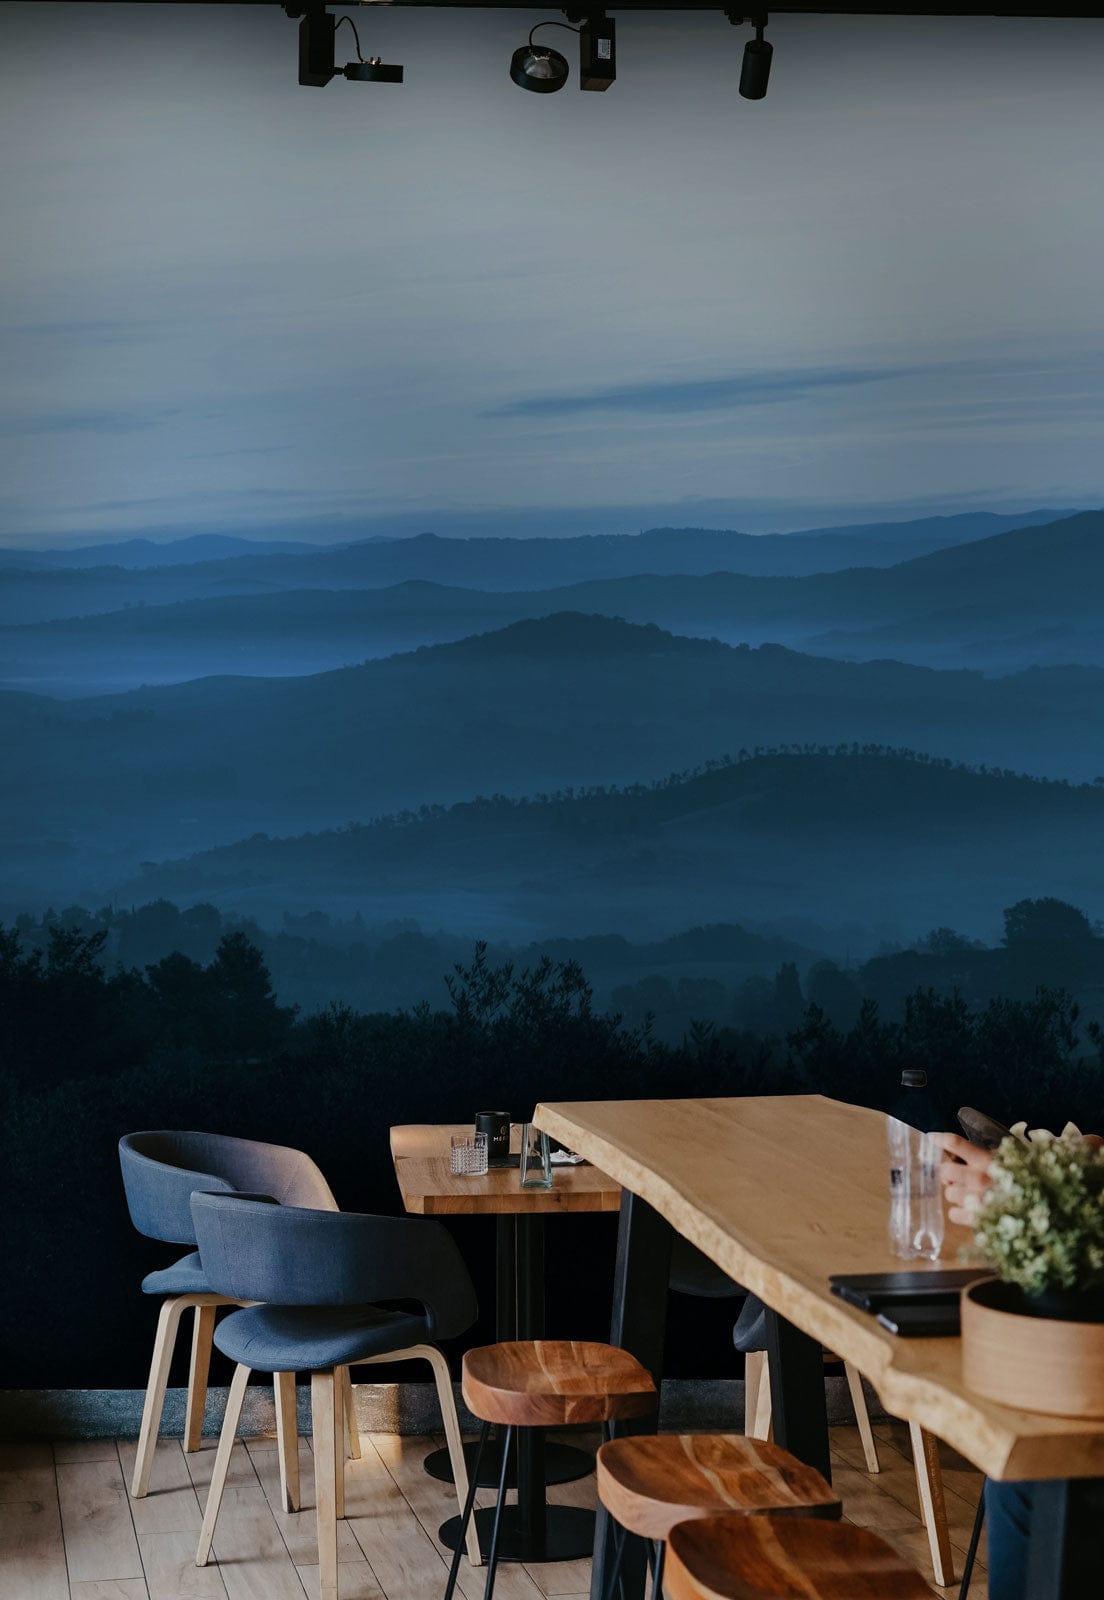 Wallpaper mural with ombre blue hilltops, perfect for decorating the dining space.